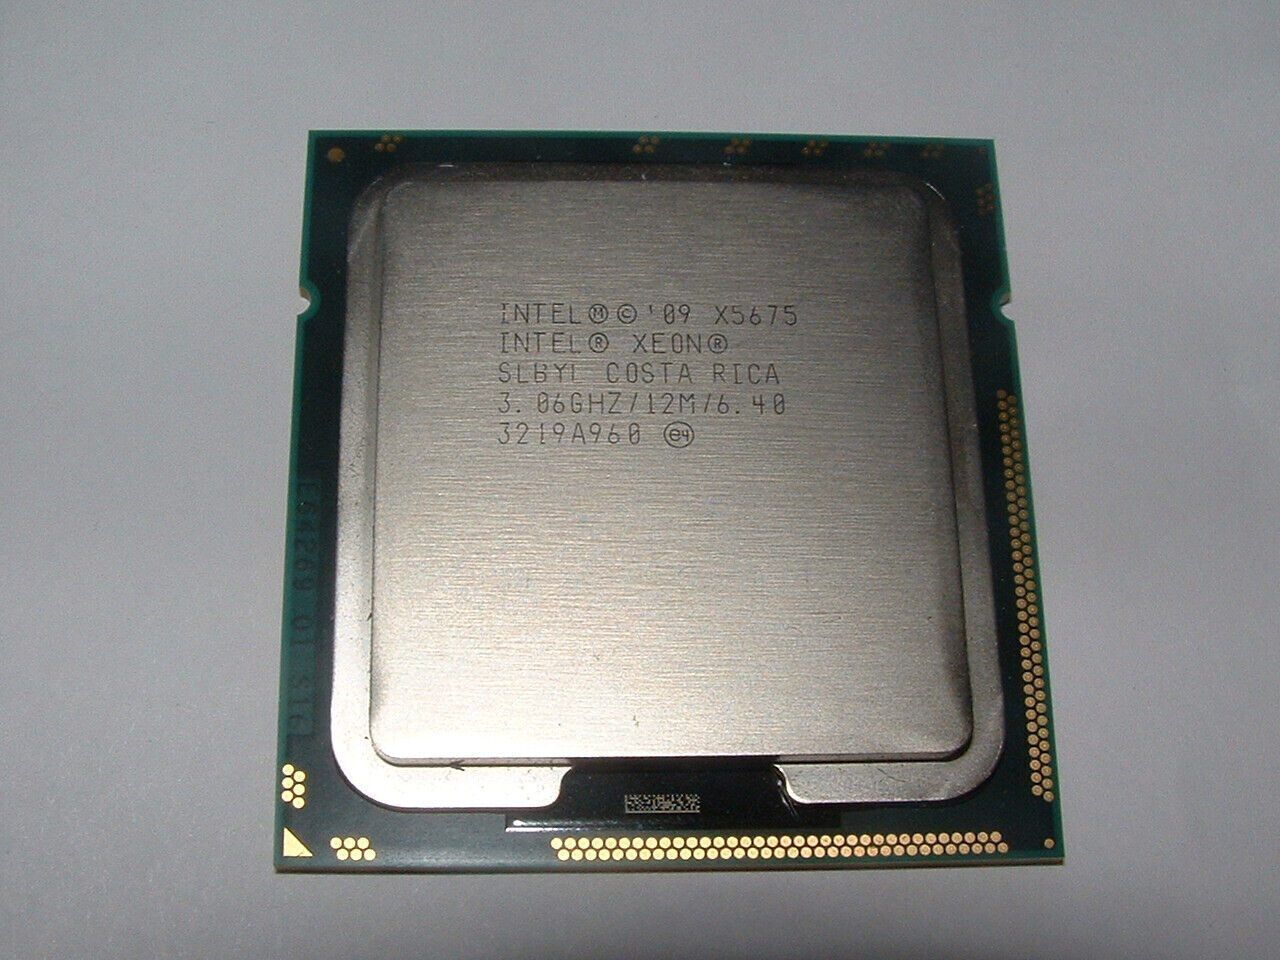 Matched Pair of Intel Xeon X5675 3.06GHz Processor / CPU __ SLBYL